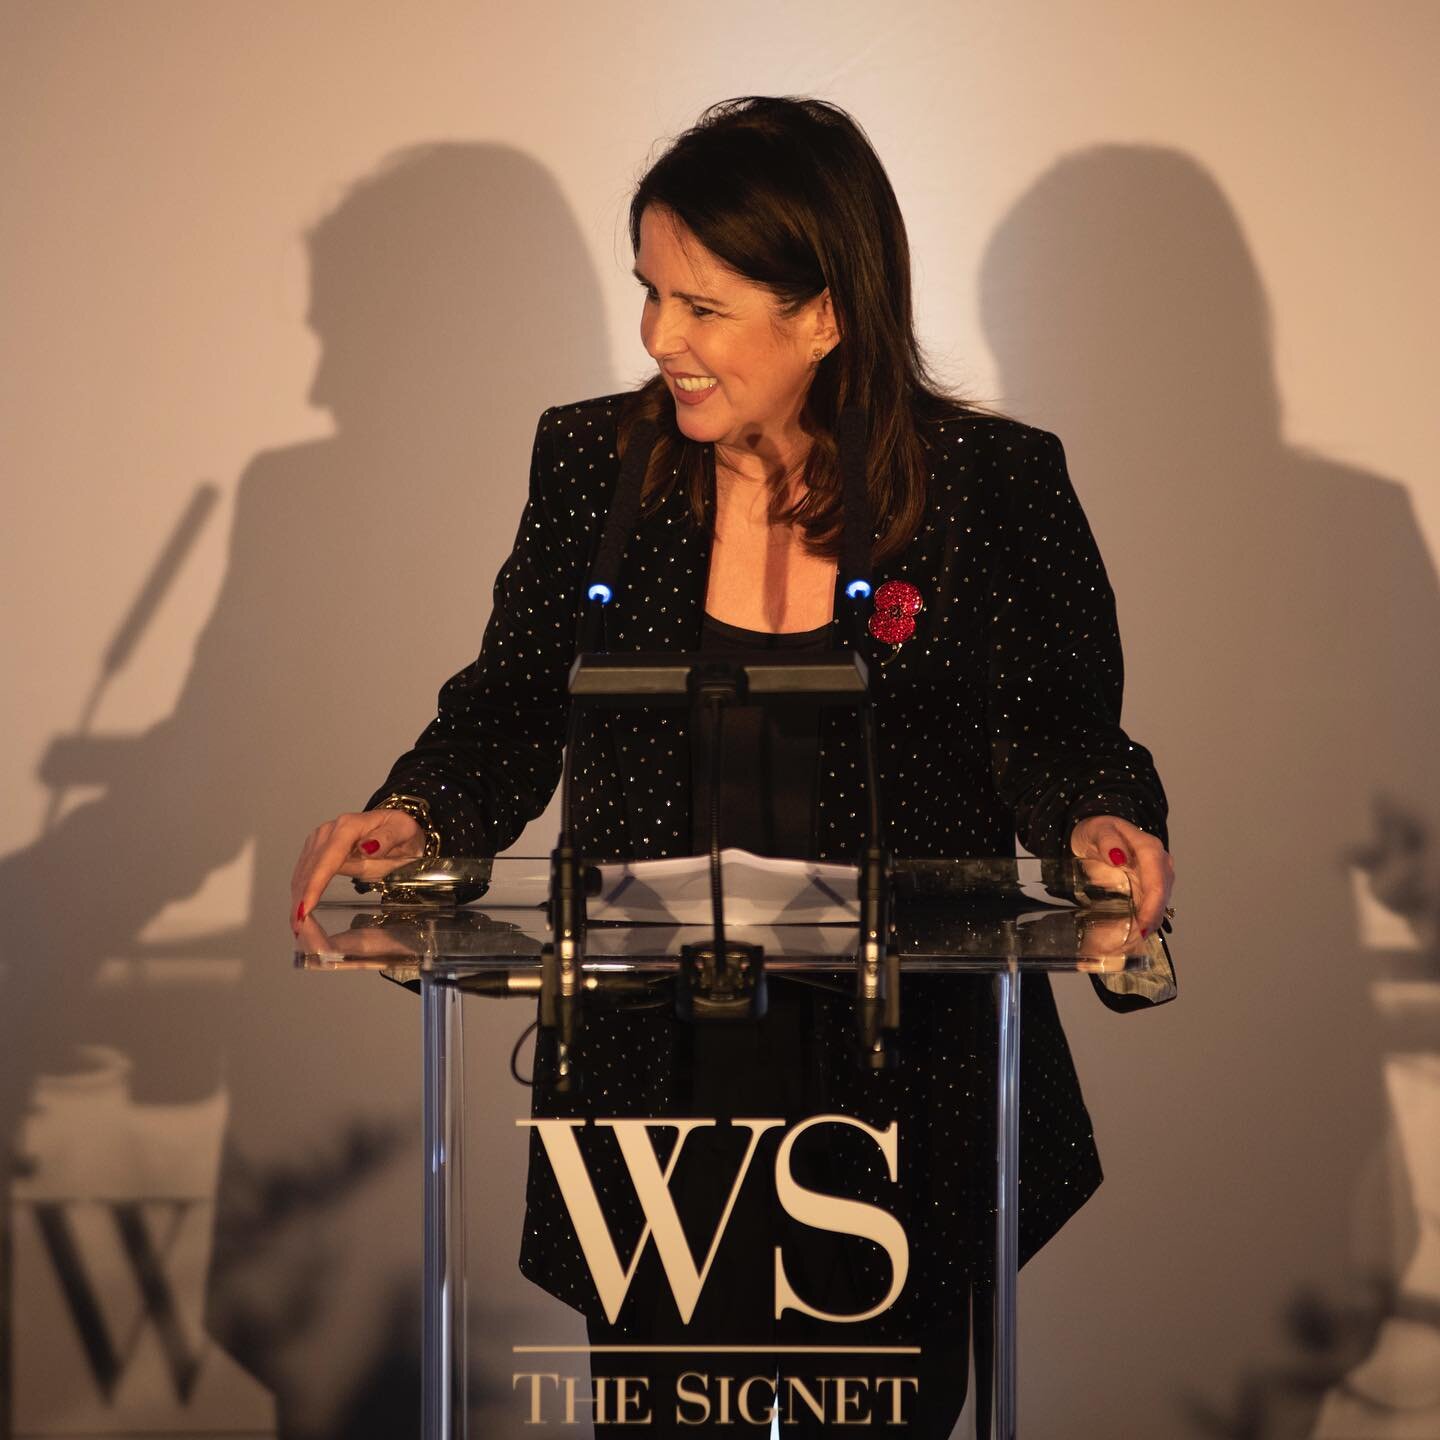 On #InternationalWomensDay we celebrate all female Writers to the Signet and Mandy Laurie, our most senior office bearer. Mandy was appointed Deputy Keeper of the Signet in 2018 and is a charismatic and inspiring leader. A highly accomplished and com